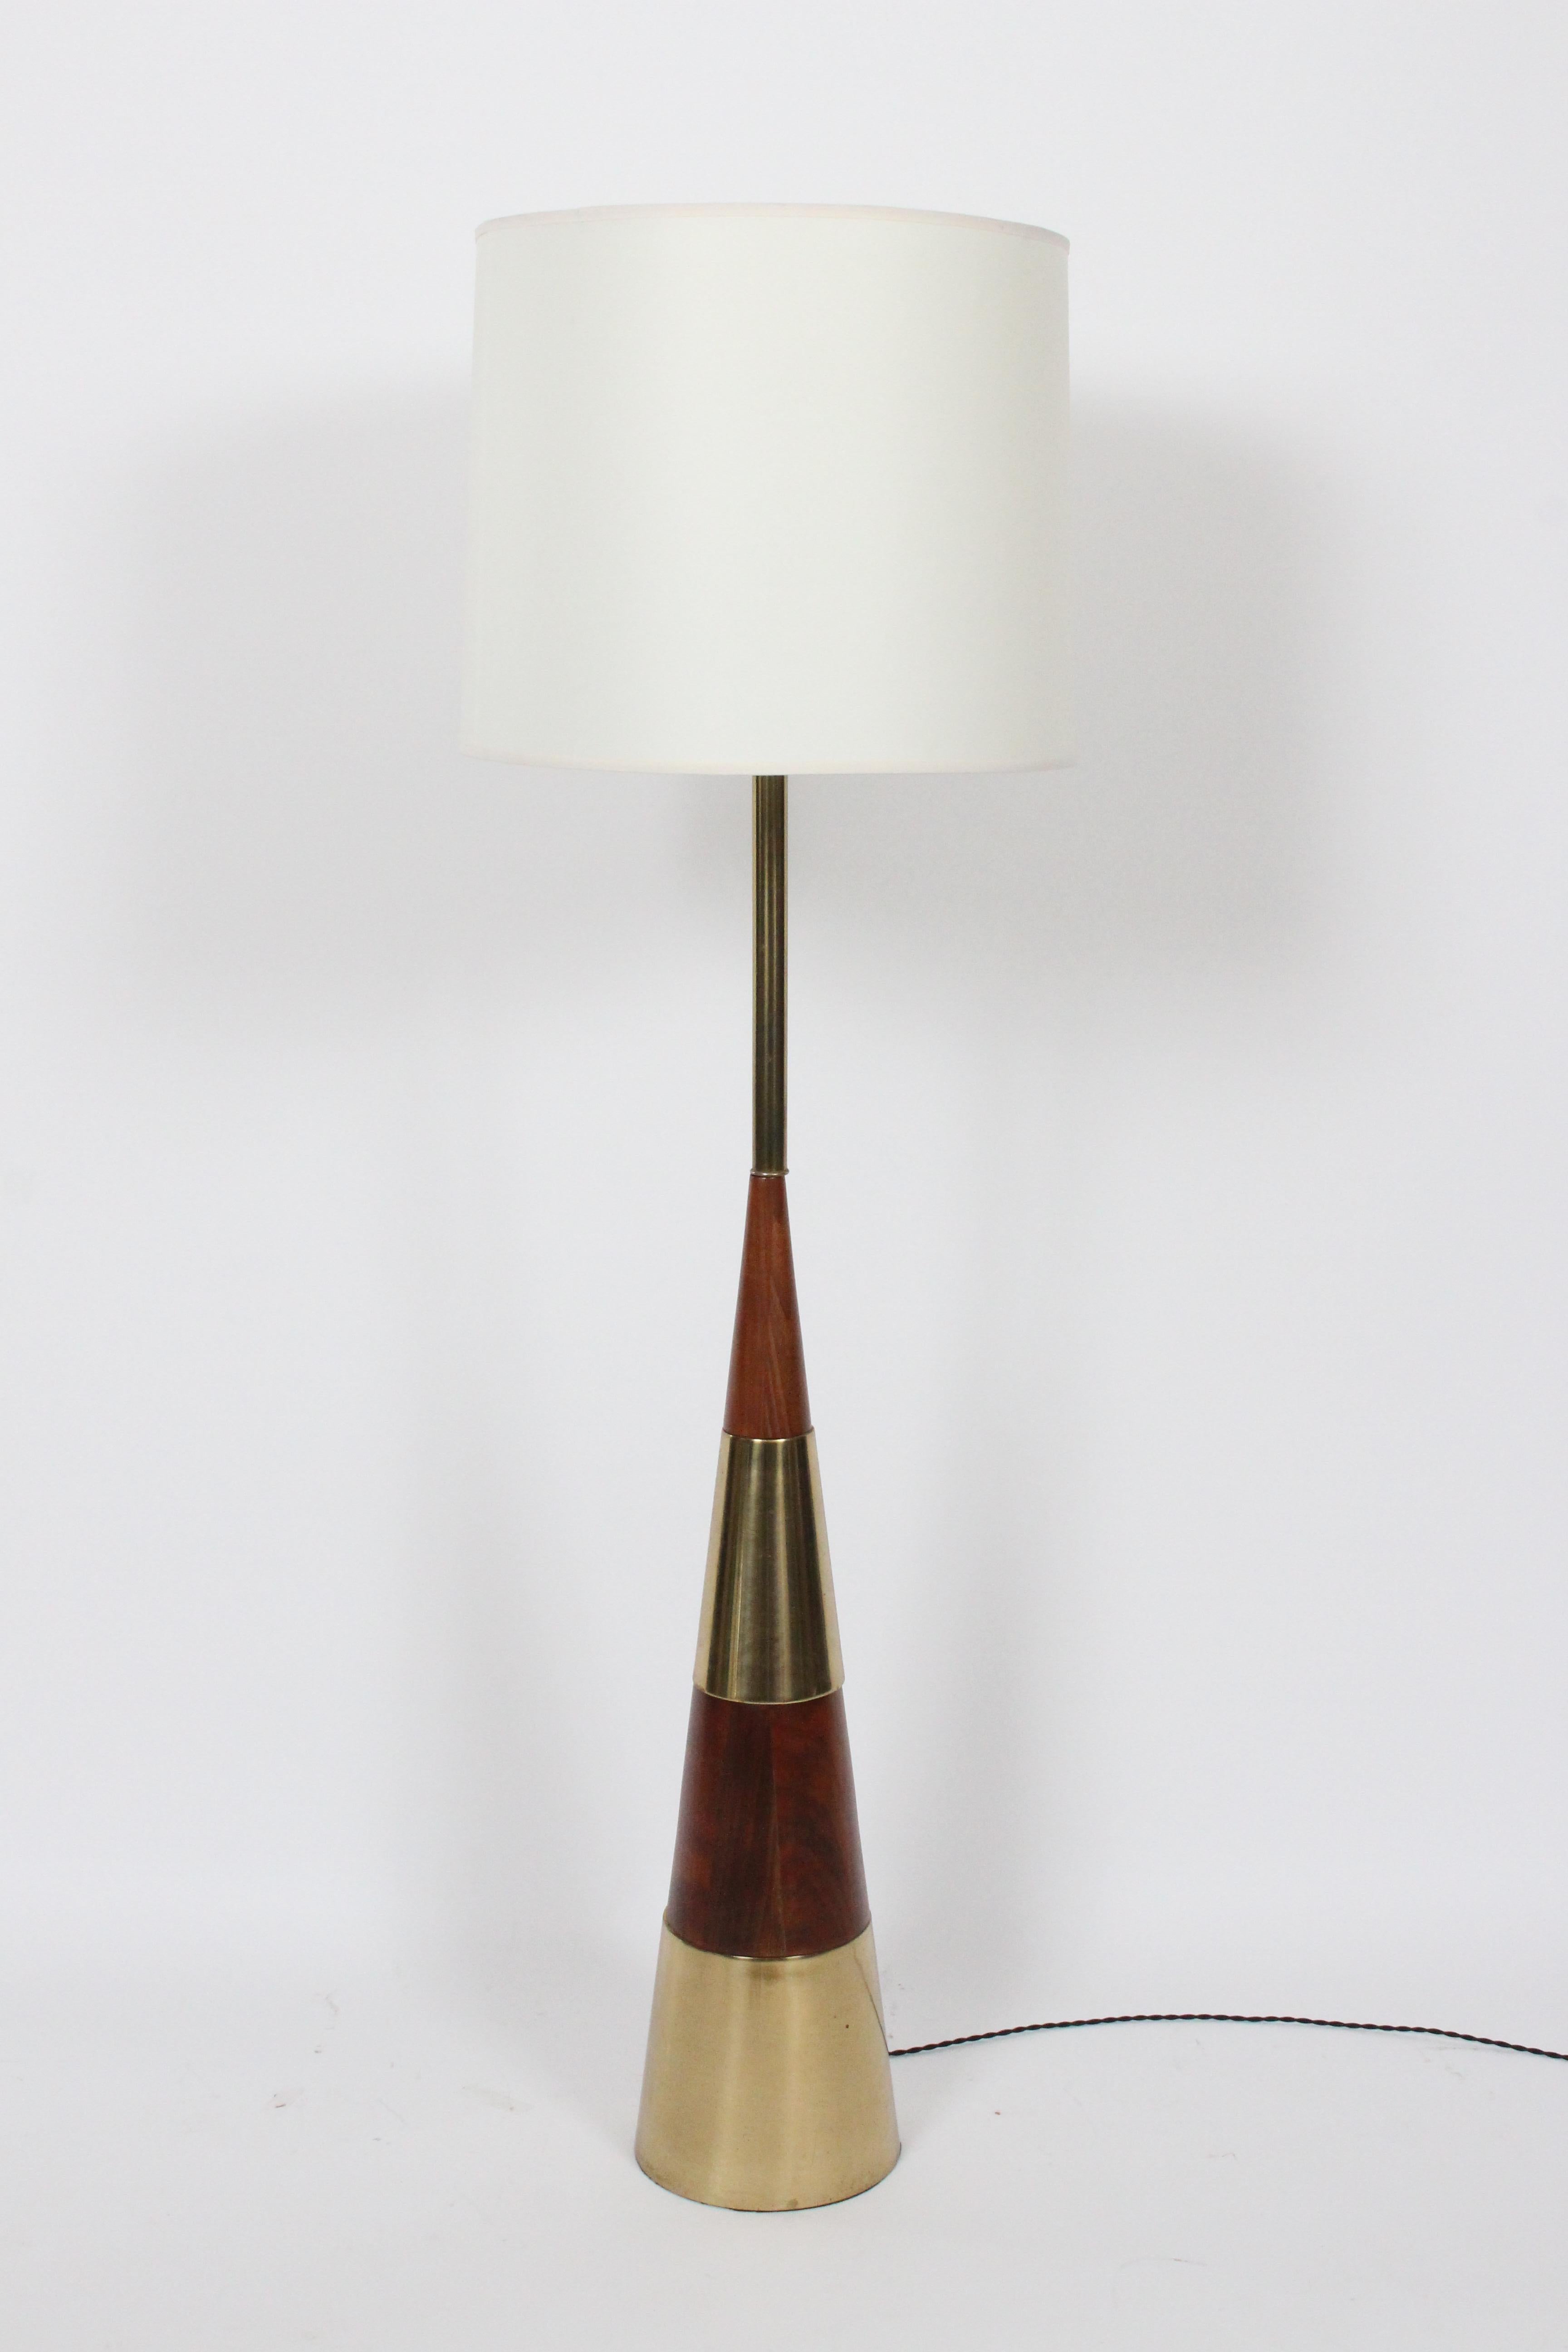 Tony Paul for Westwood Industries solid walnut and brass stacked cone floor lamp, 1950s.  Featuring a balanced layered and reflective conical bright brass and solid Walnut form with plated tubular stem. Small footprint. Shade shown for display only